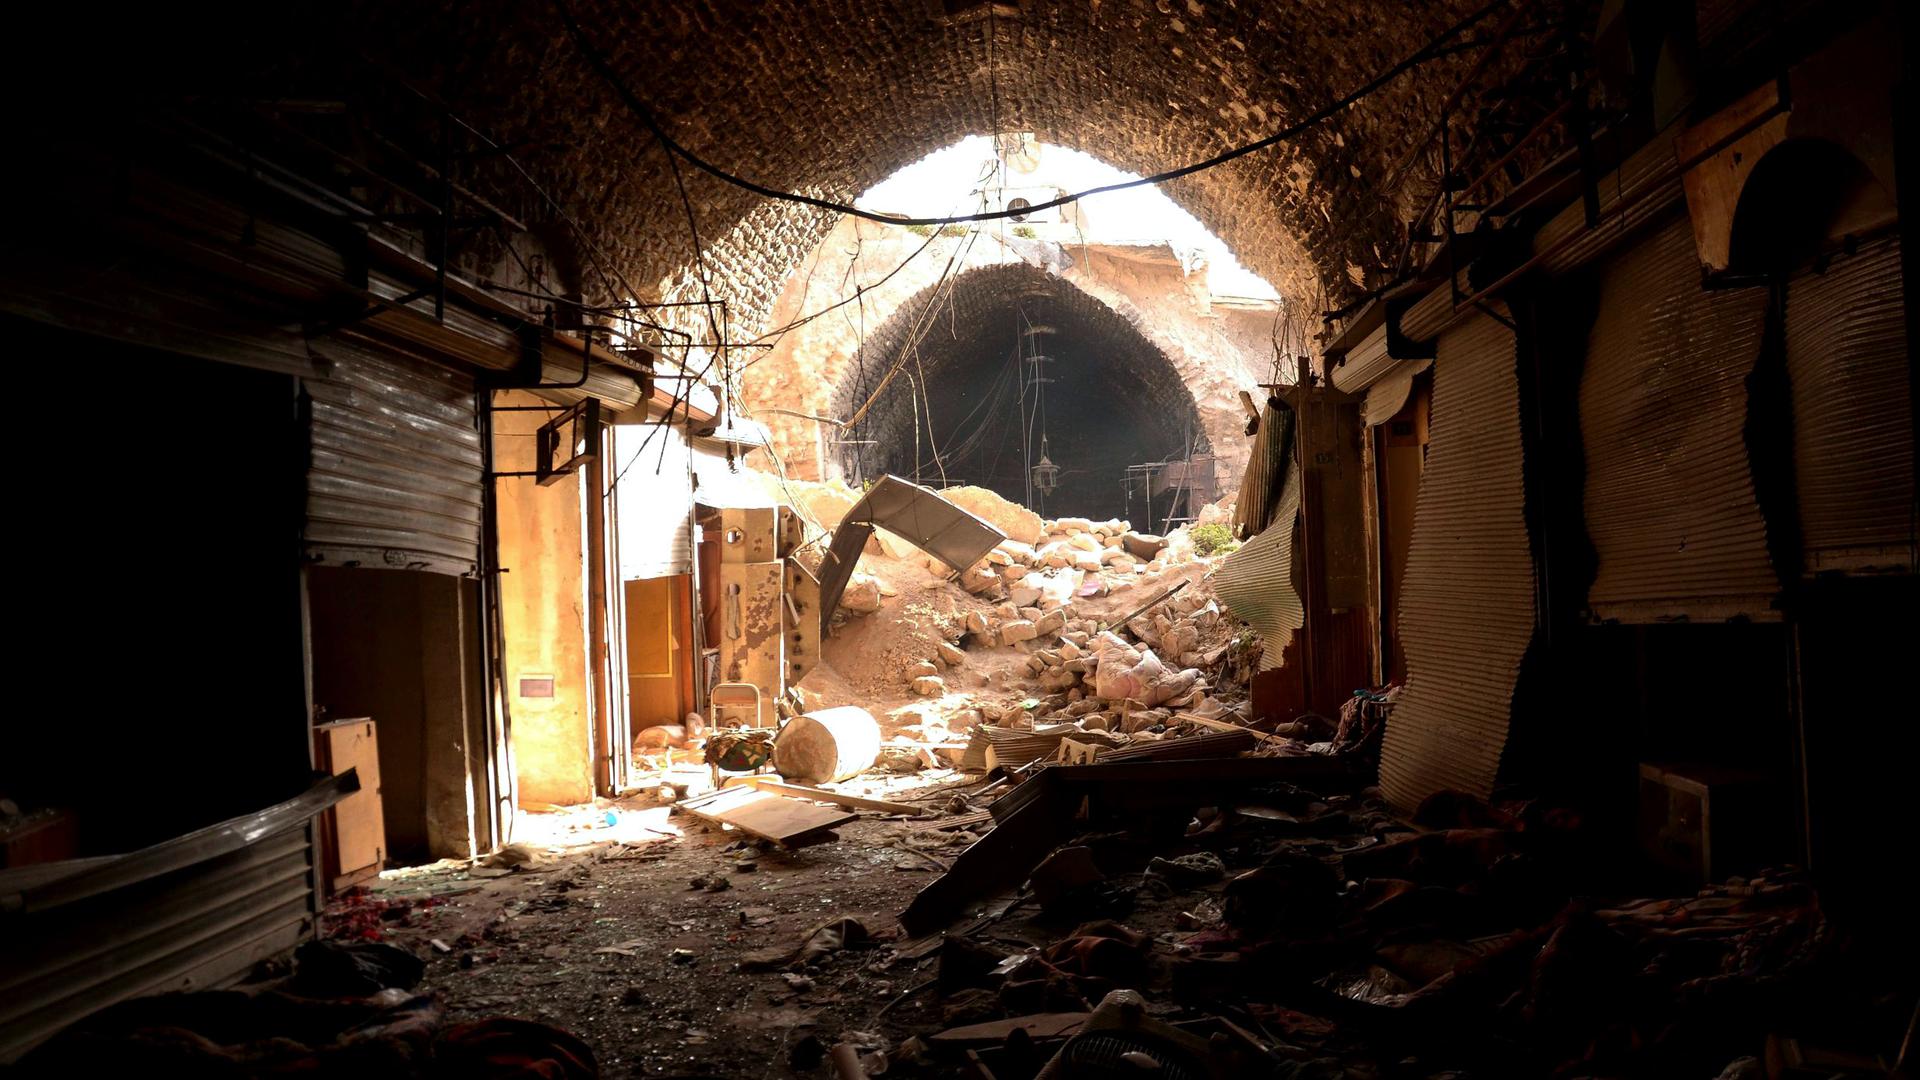 Rubble fills a tunnel that was a souk shop. Some shop locations are visible, with metal doors pulled down. There are no people, no lights.